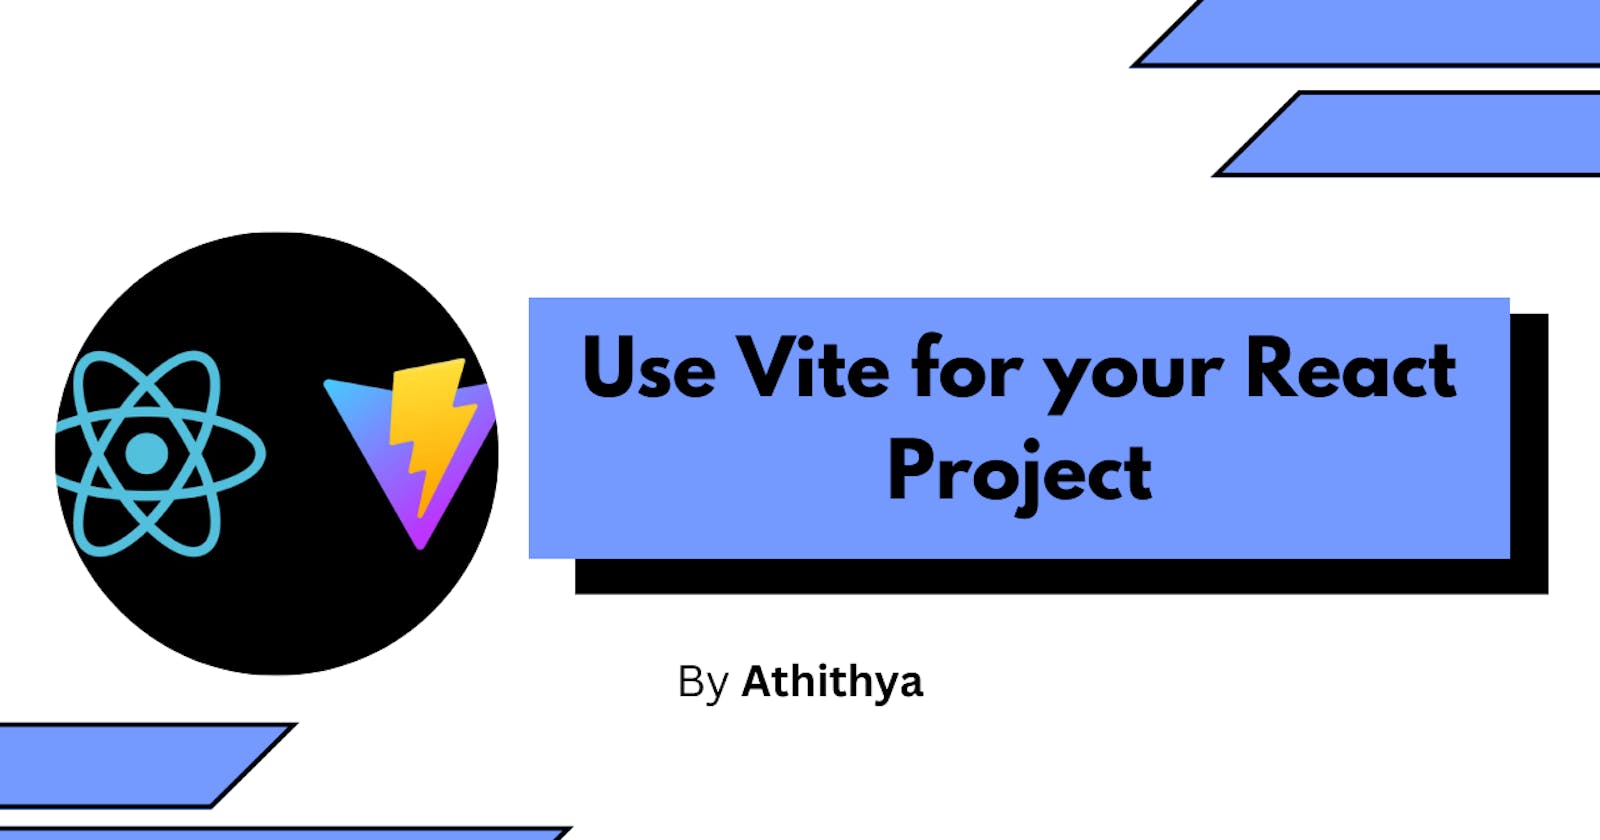 Use Vite for your React project!